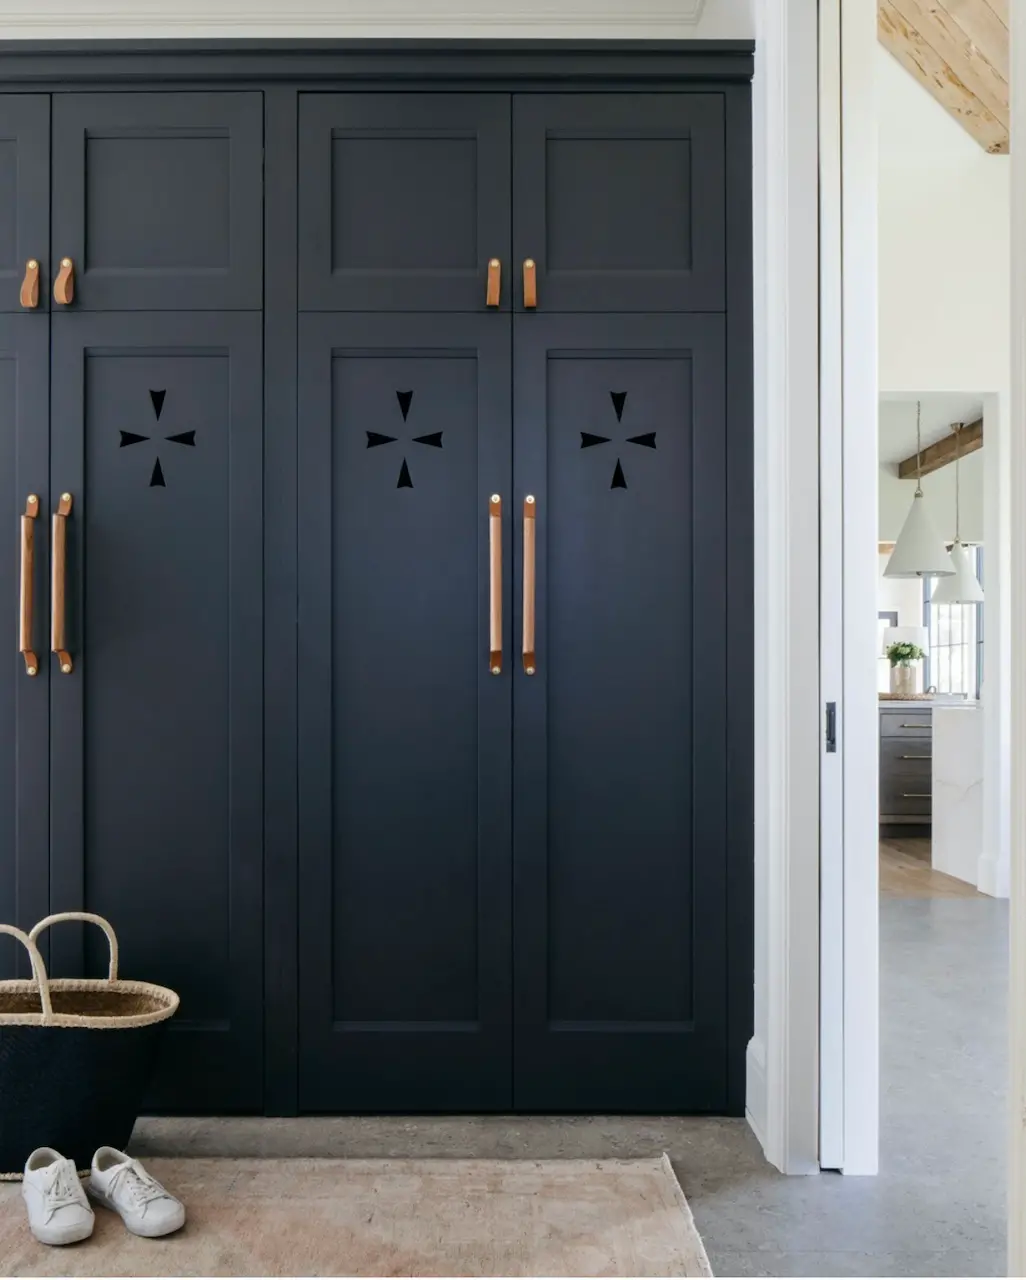 Our Mudroom Mood Board, Plus Three Tips for Designing High-Traffic Areas